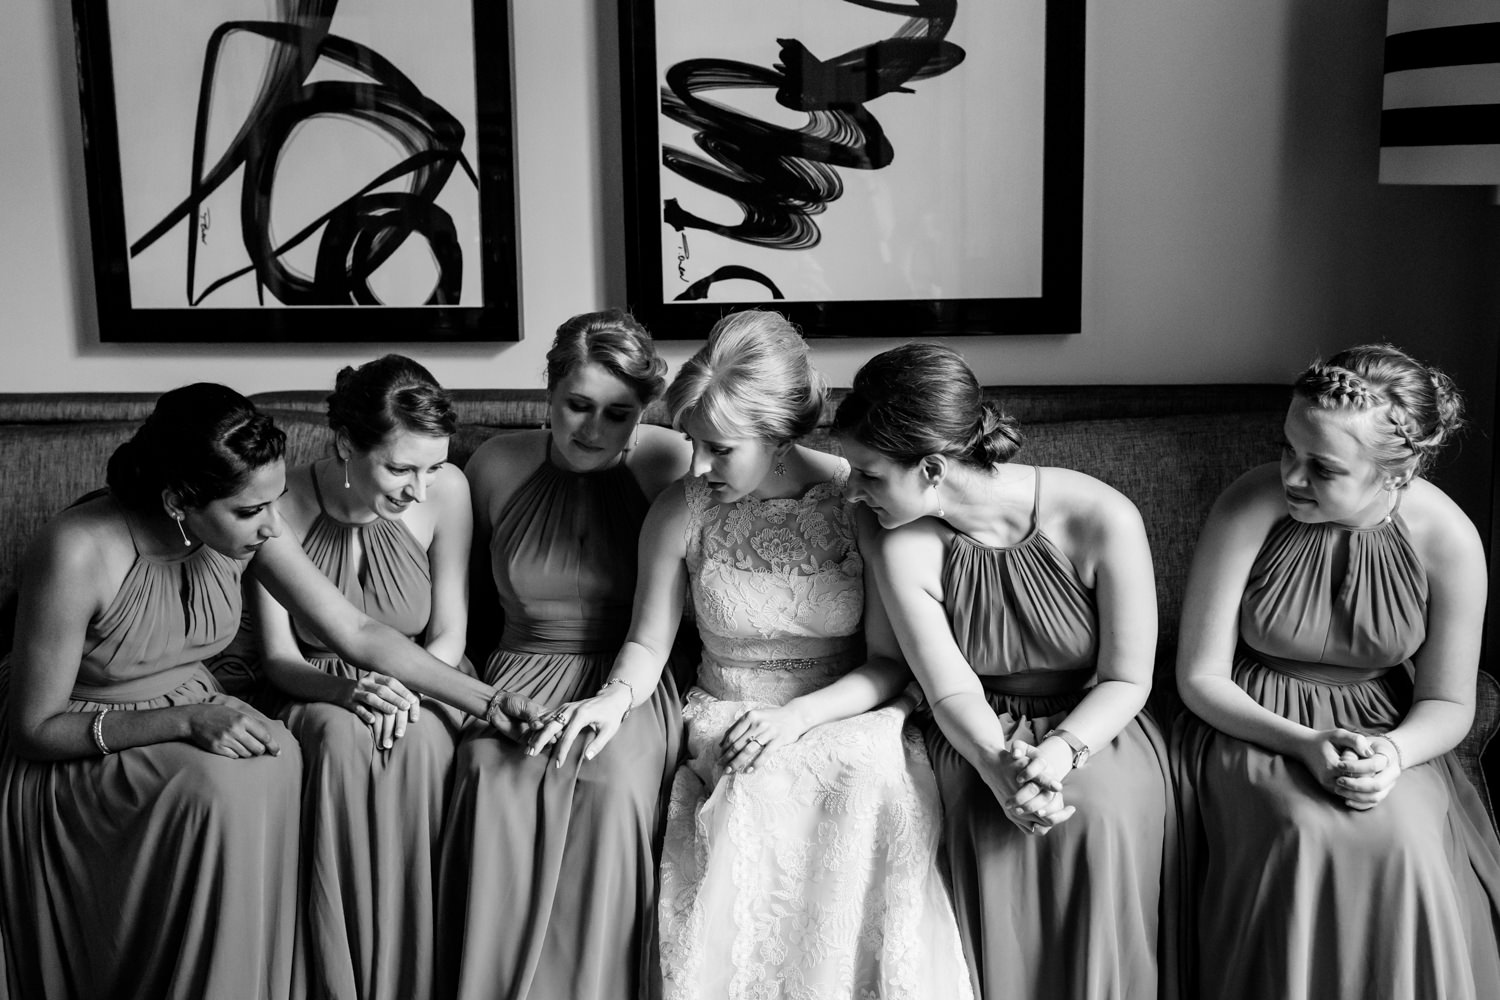 This wedding was at The hotel Monaco in Chinatown, Washington DC, the bride and her bridesmaids take a moment to sit on the couch and admire the bride's ring, this is a black and white photo, Procopio Photography, best top Washington DC photographer, best top Maryland photographer, best top Virginia photographer, best top DMV photographer, best top wedding photographer, best top commercial photographer, best top portrait photographer, best top boudoir photographer, modern fine art portraits, dramatic, unique, different, bold, editorial, photojournalism, award winning photographer, published photographer, memorable images, be different, stand out